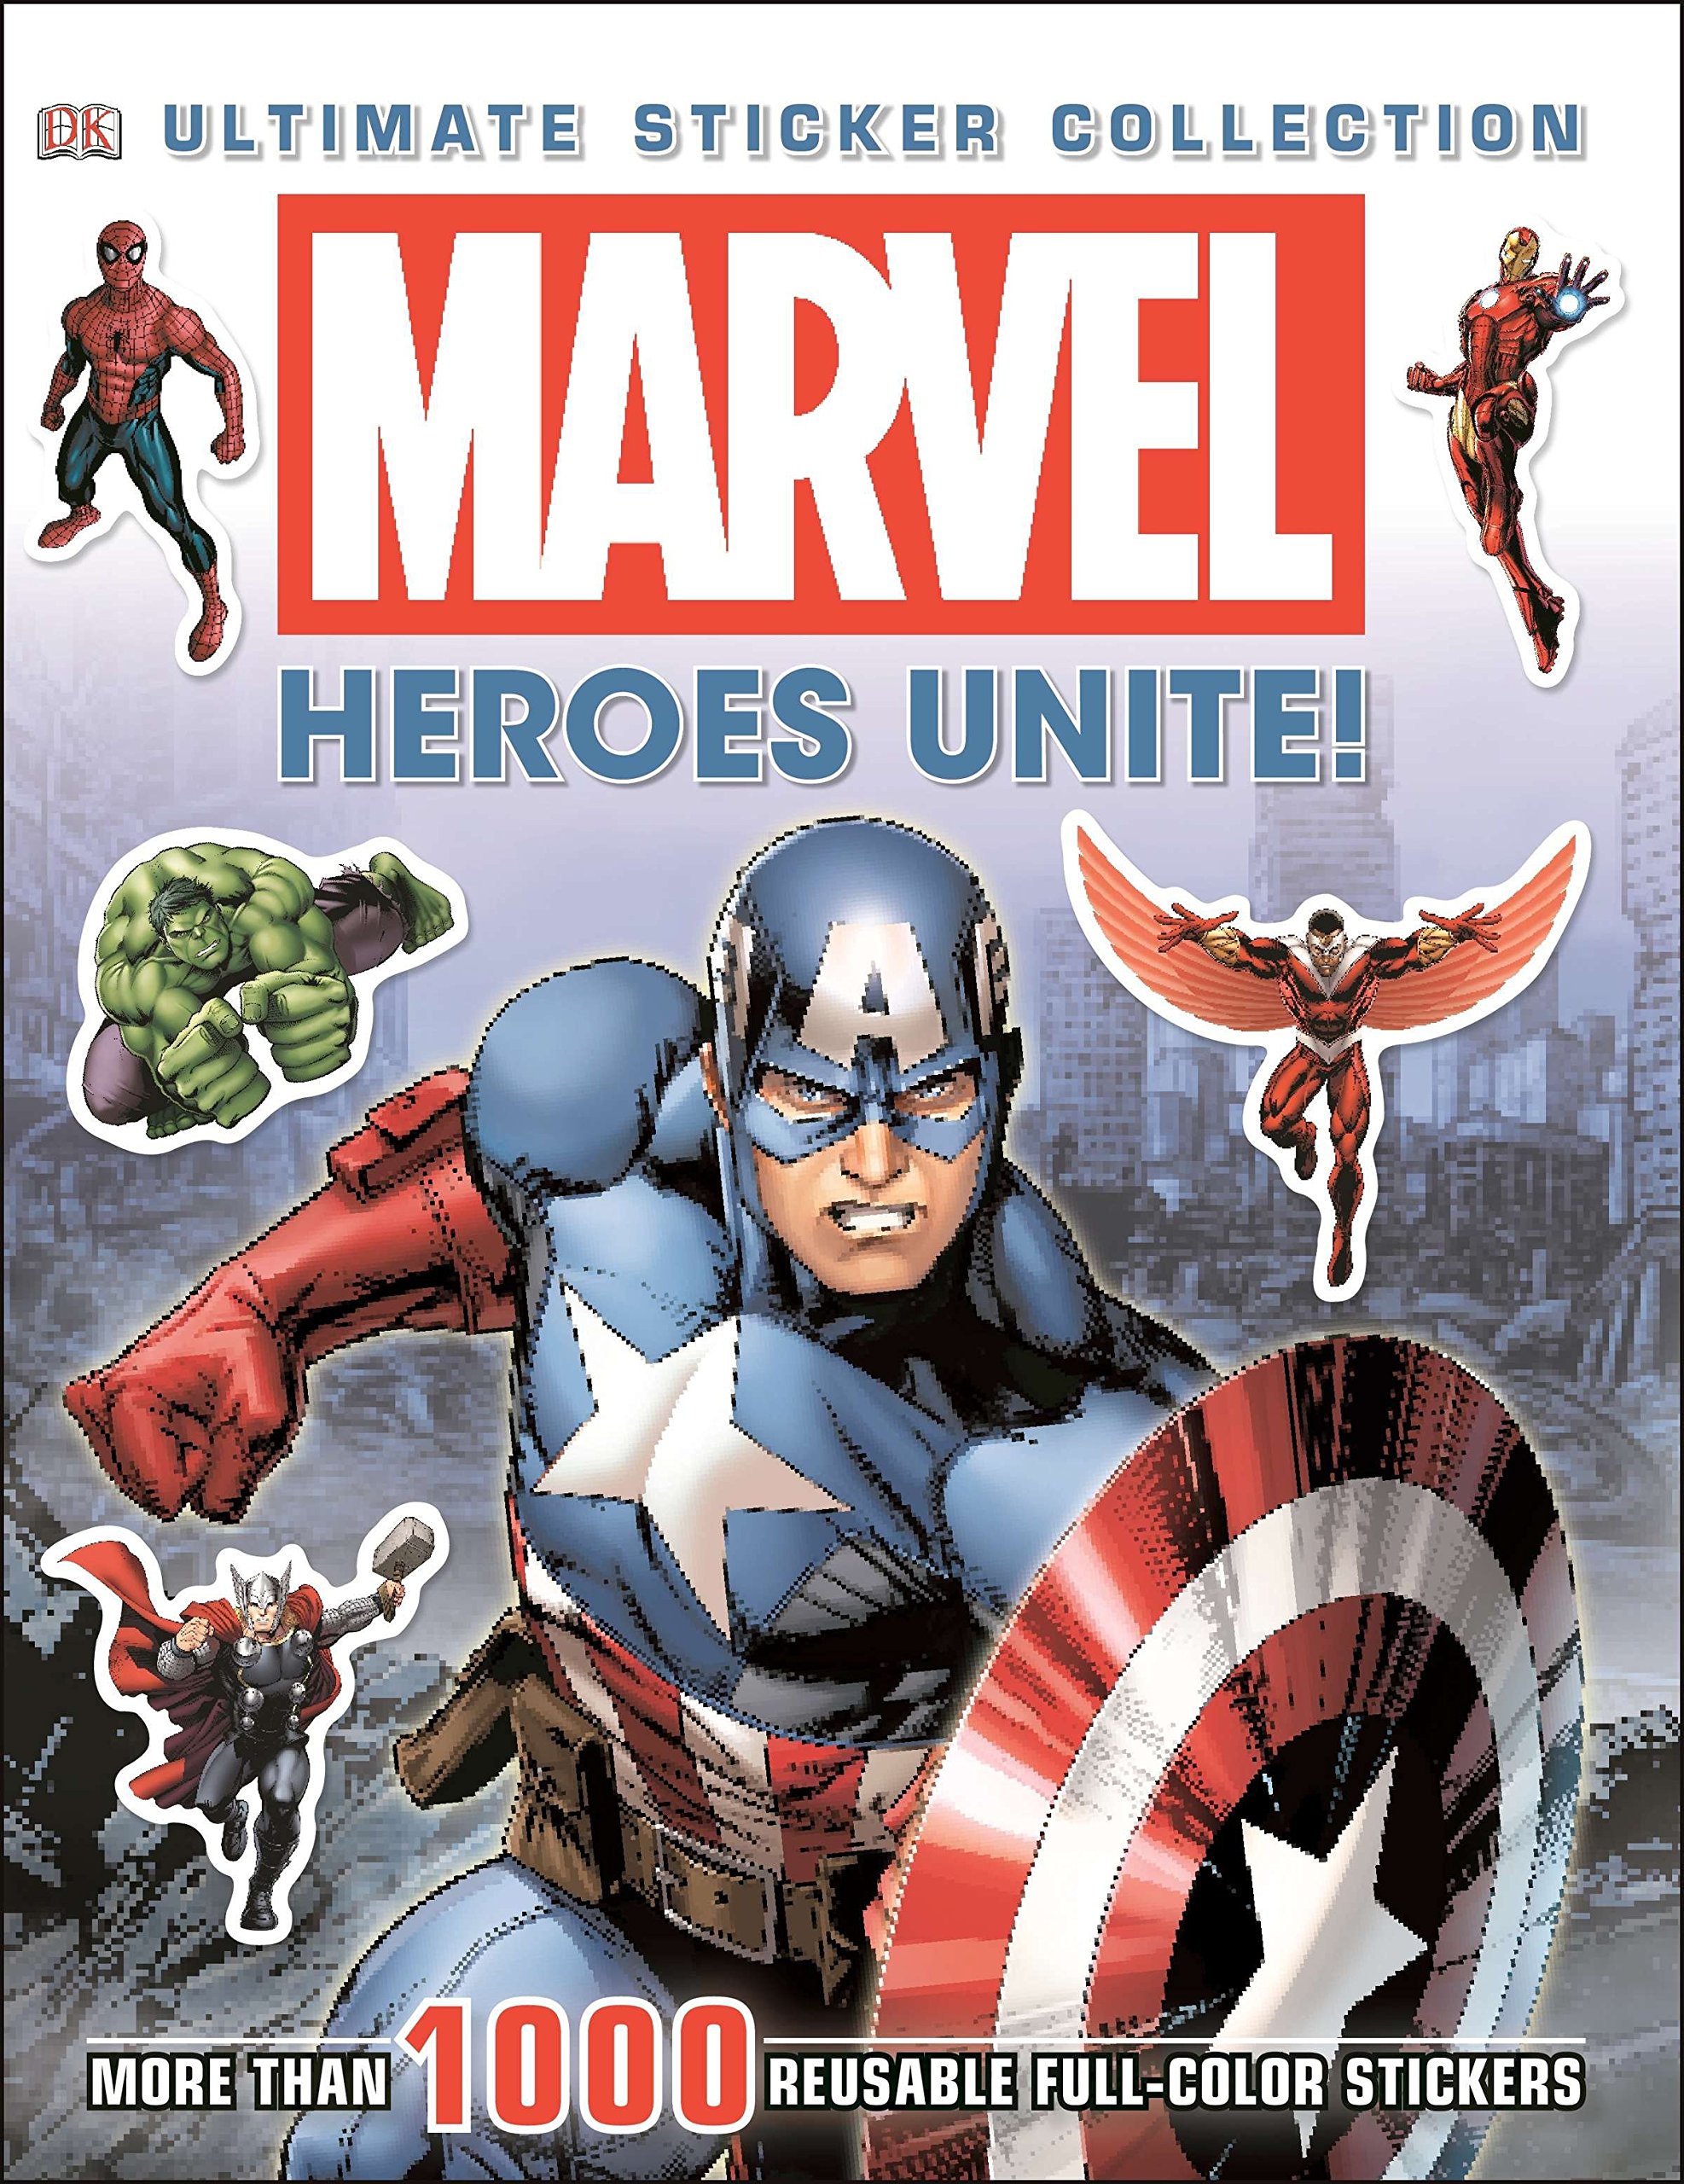 Dk Ultimate Sticker Collection - Marvel Heroes Unite!